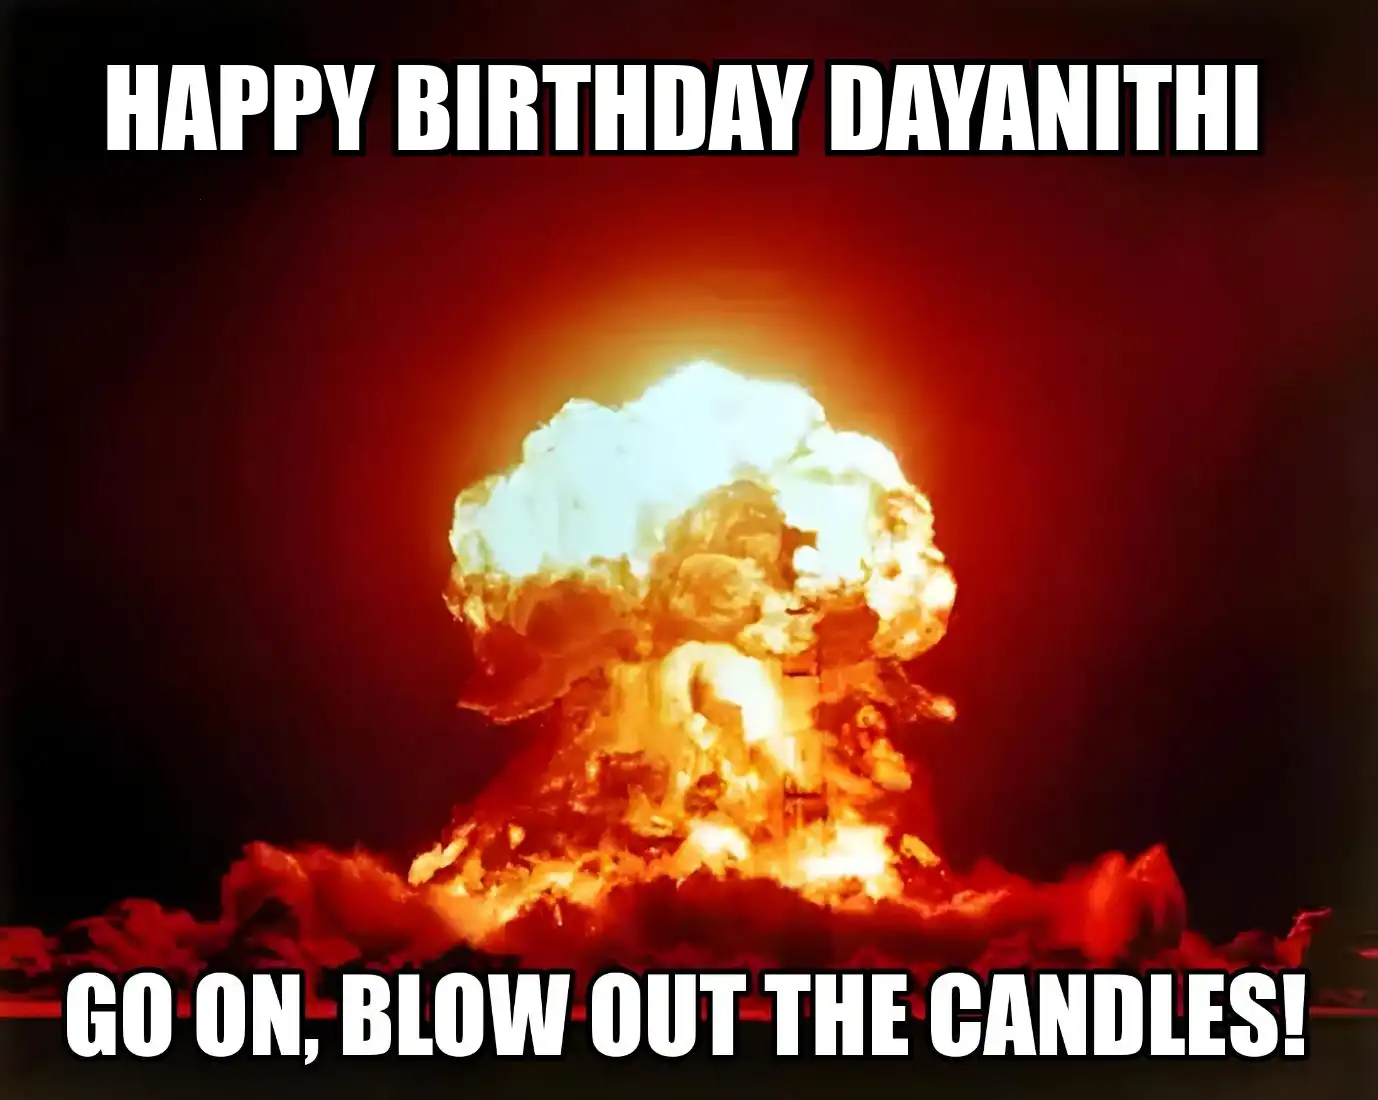 Happy Birthday Dayanithi Go On Blow Out The Candles Meme